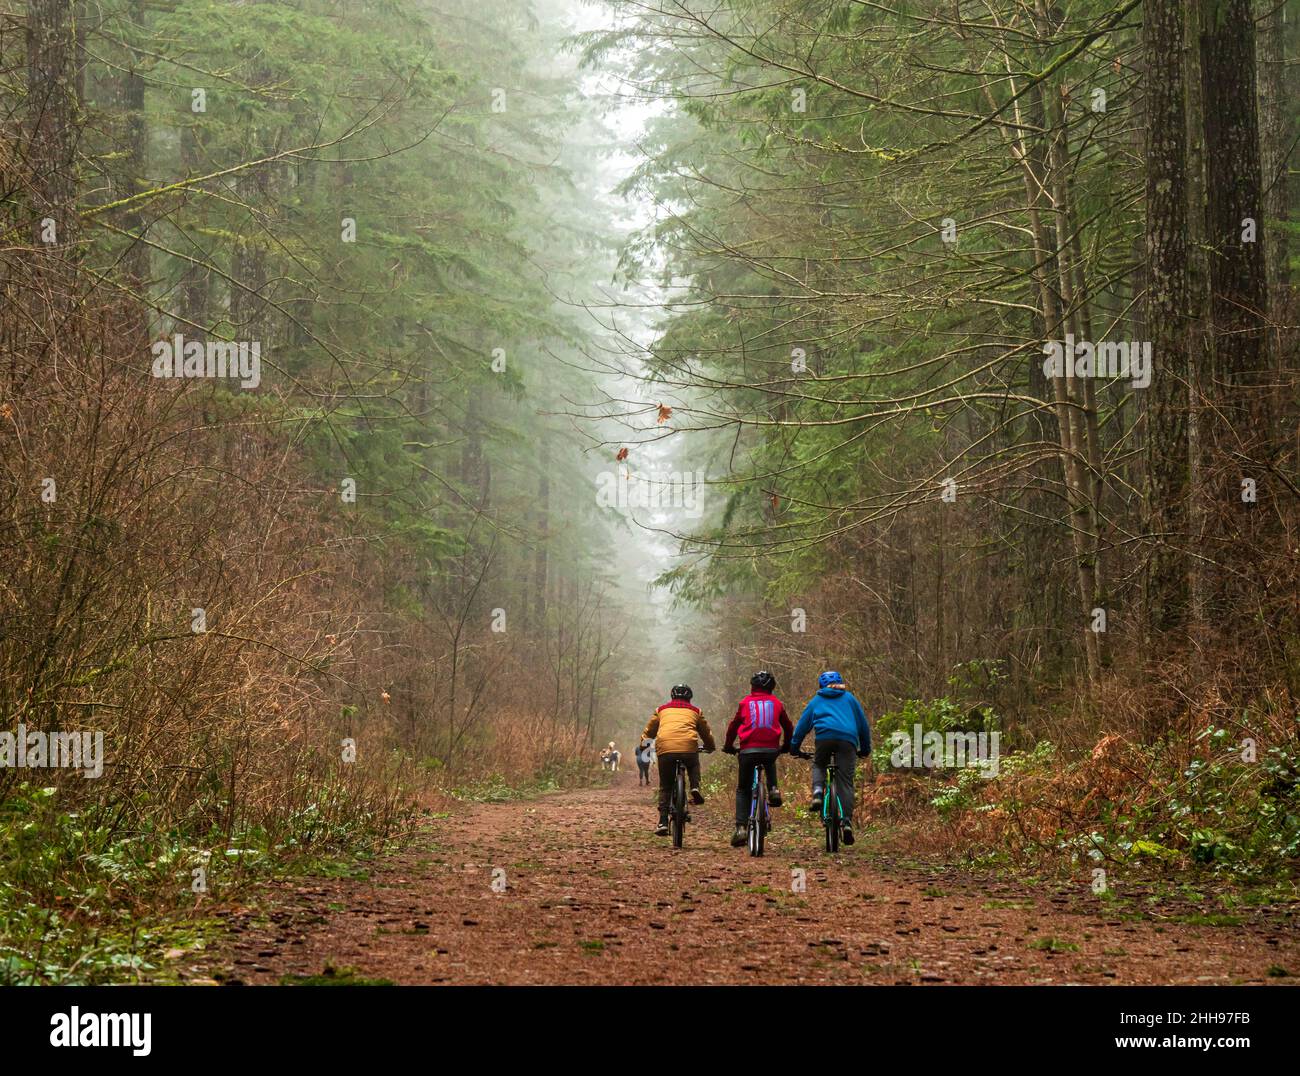 Three cyclists riding on a trail, with mist, tall deciduous trees, fallen leaves on trail in f Stock Photo